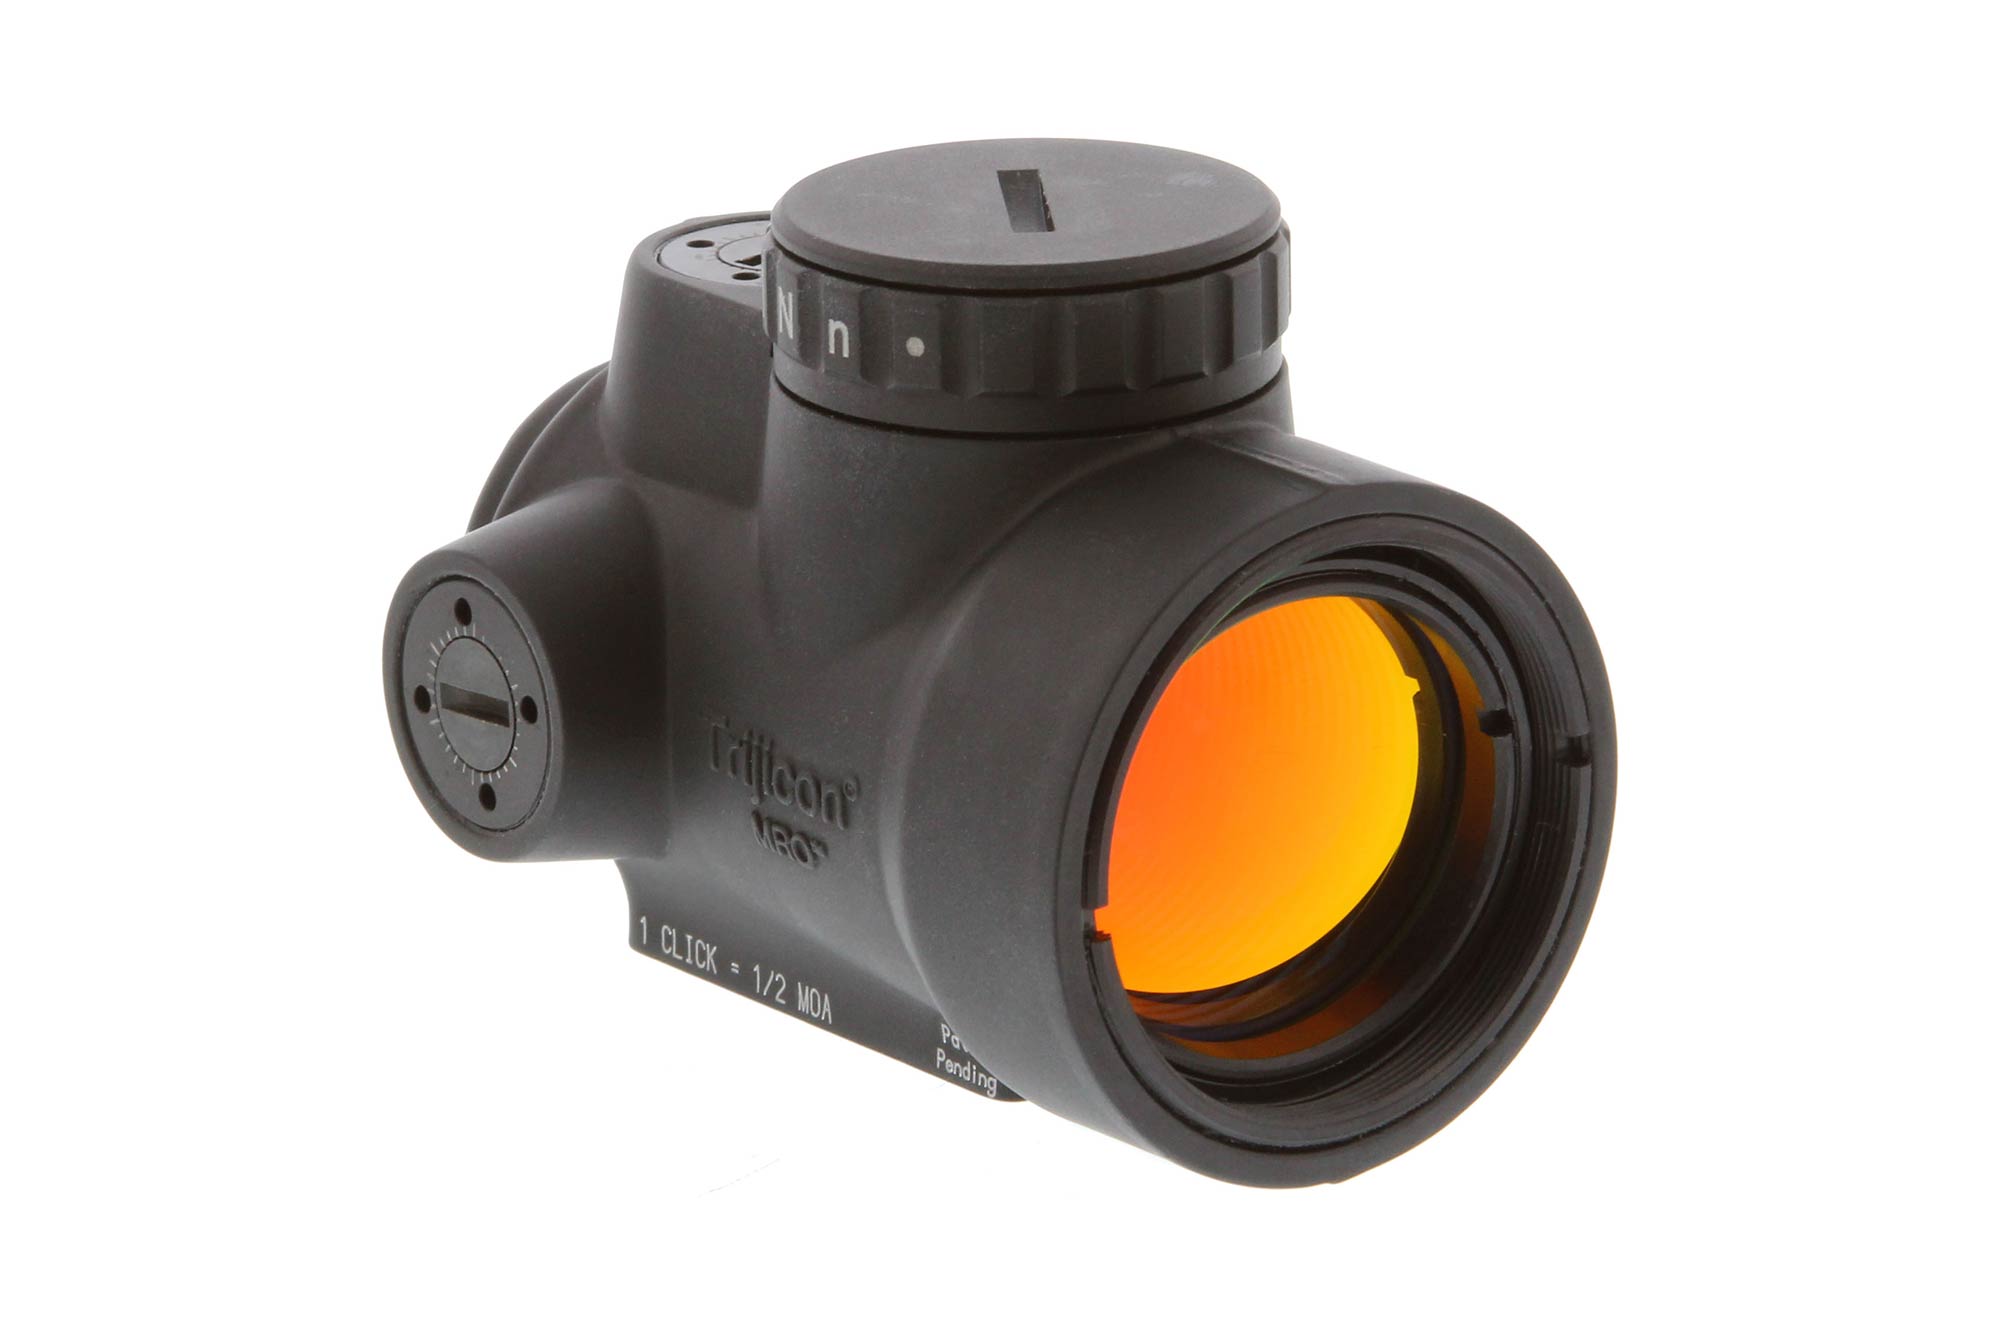 Trijicon MRO Red Dot Sight 2 MOA No Mount - $351.99 after code: SAVE12